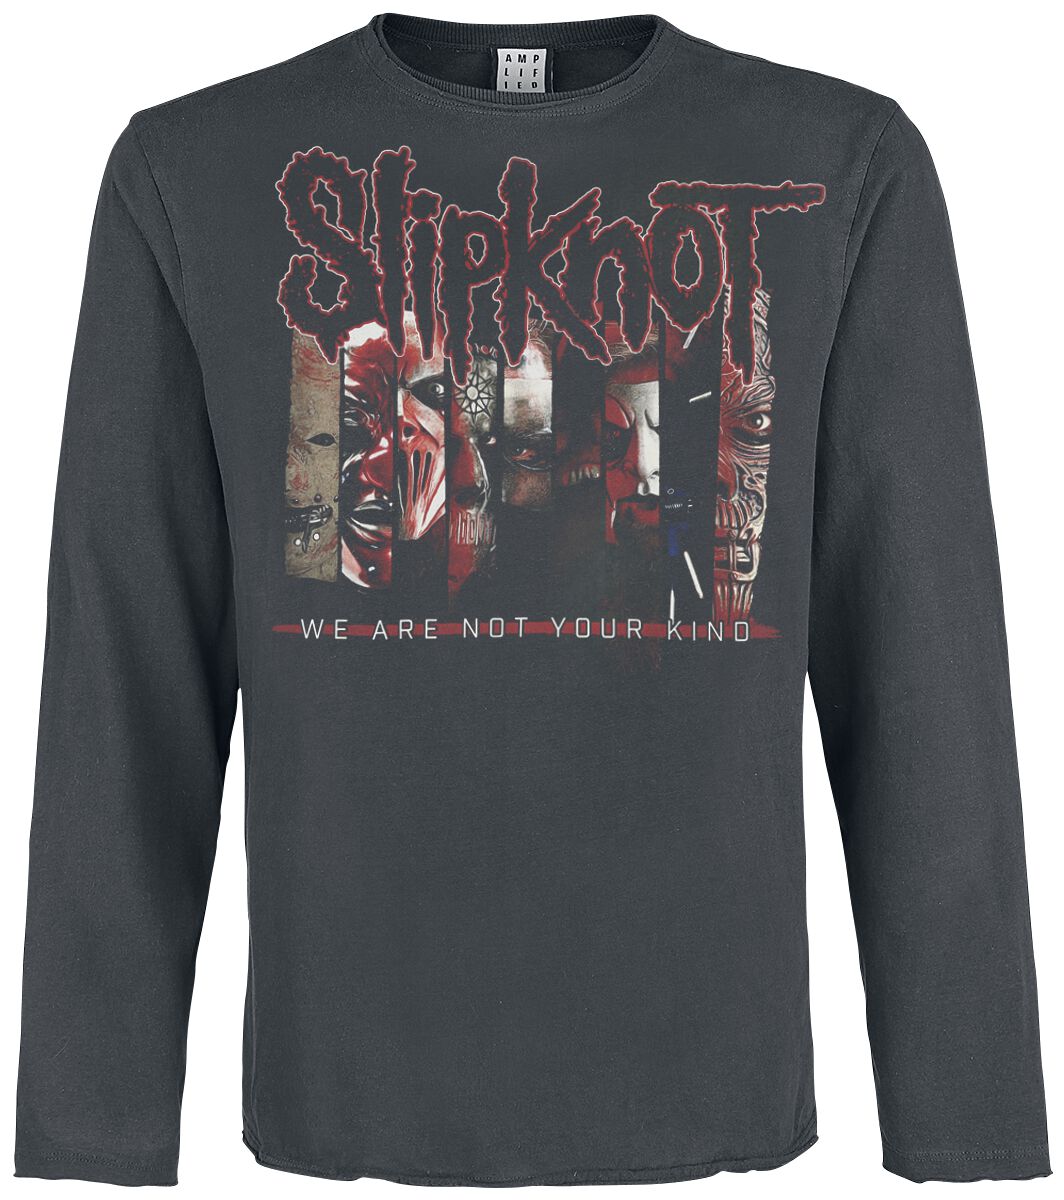 Slipknot Amplified Collection - We Are Not Your Kind Long-sleeve Shirt charcoal